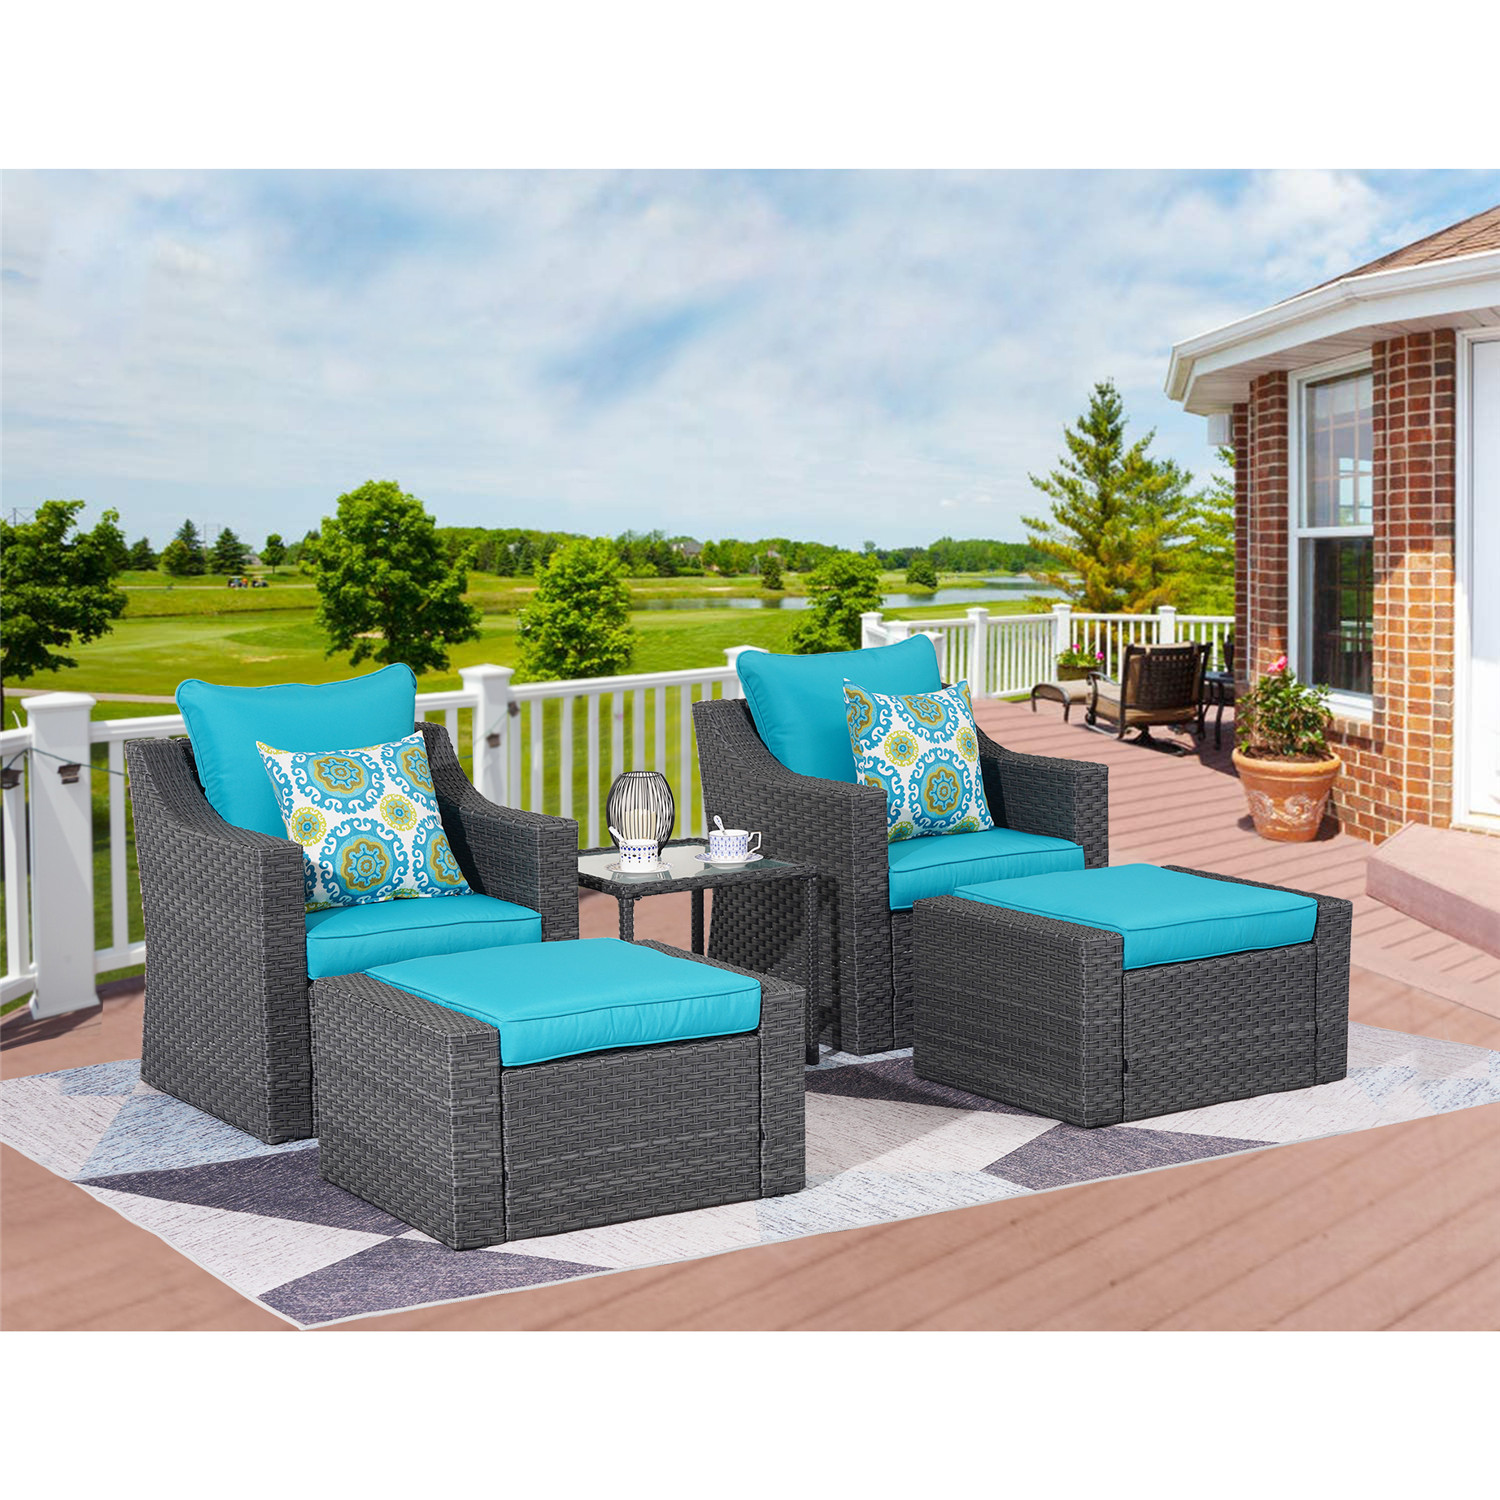 Superjoe 5 Pcs Outdoor Patio Furniture Set All Weather PE Rattan Wicker Chairs with Ottomans and Side Table,Blue - image 1 of 7